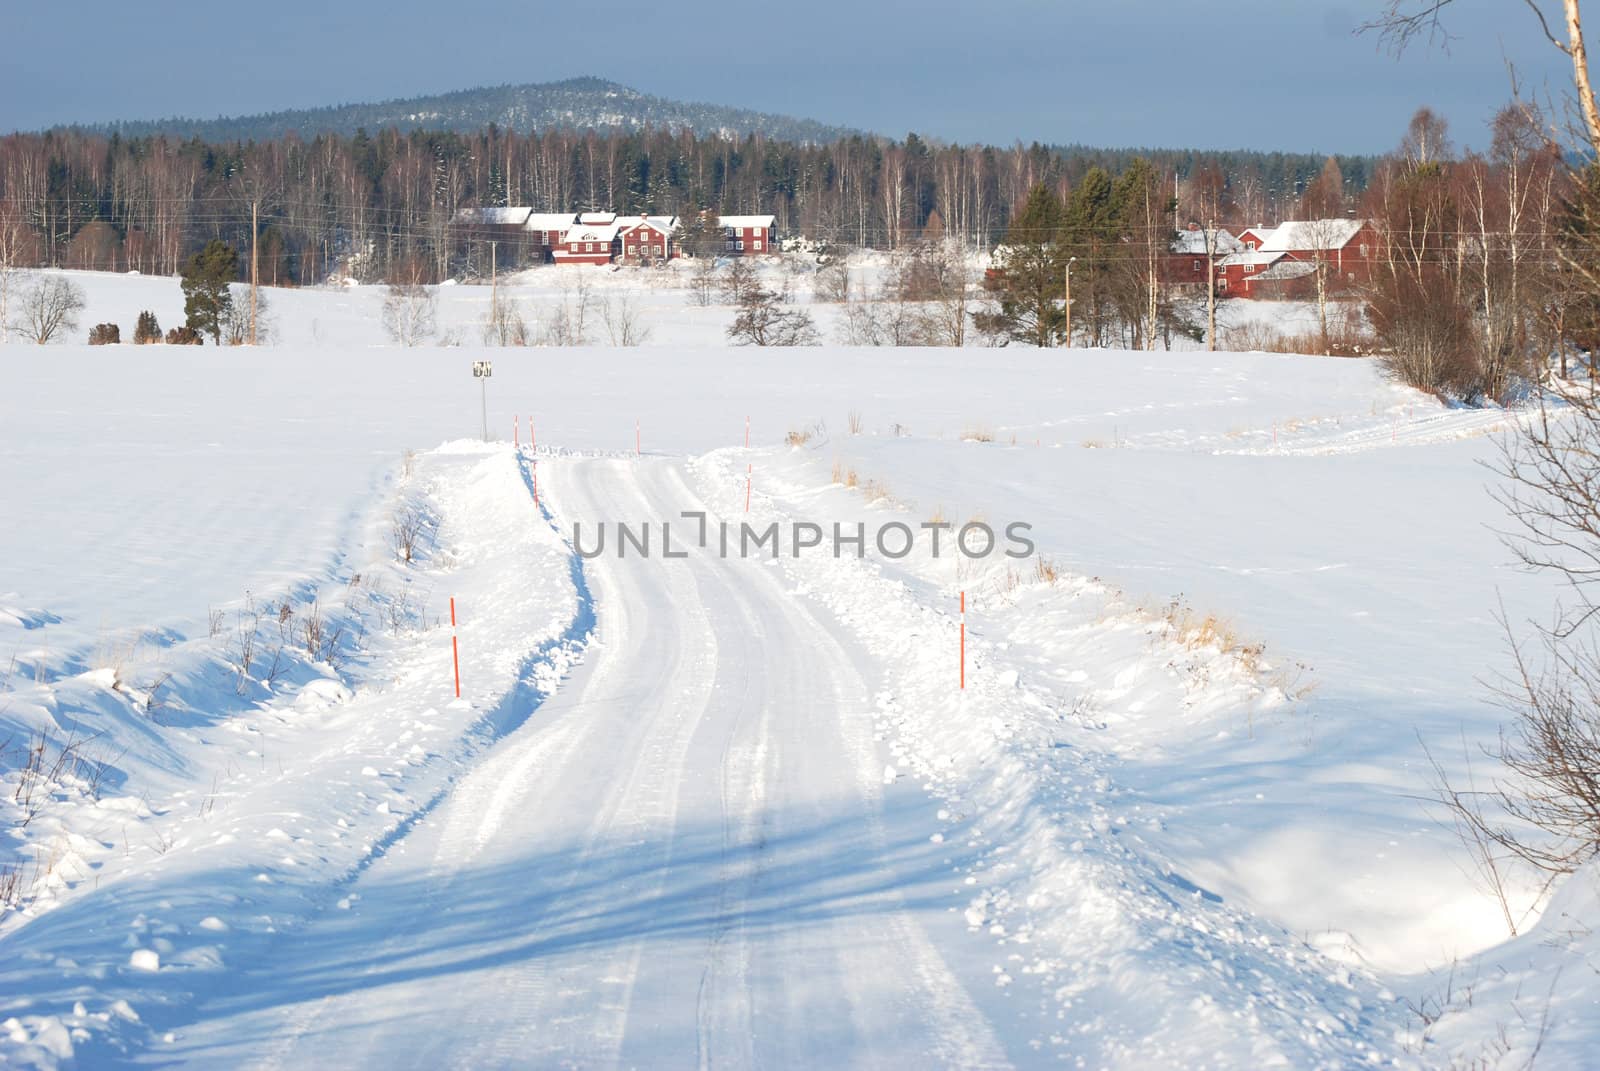 A winter road that leads through a winter landscape